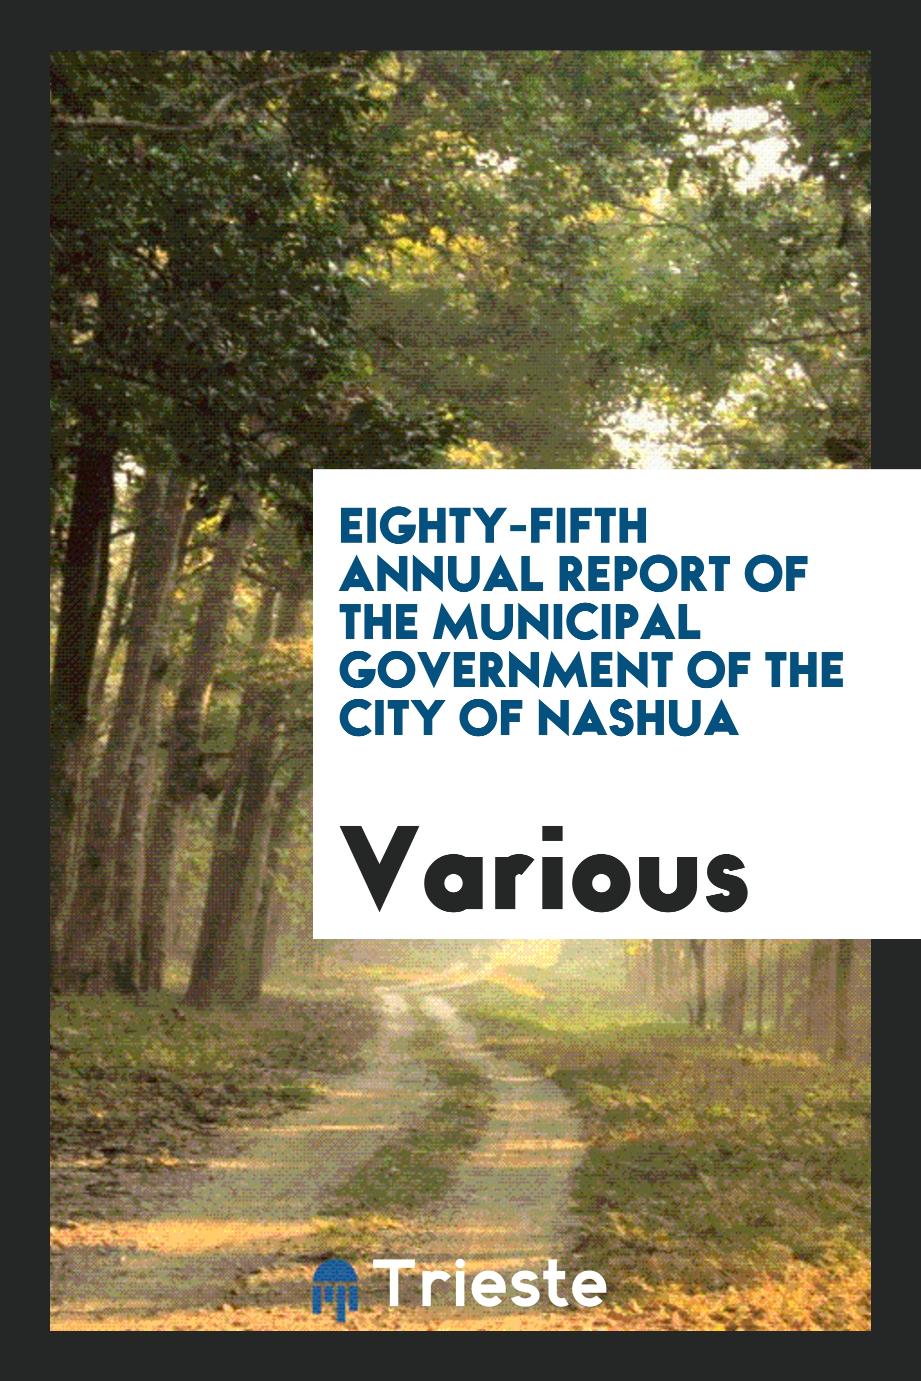 Eighty-fifth Annual Report of the municipal government of the City of Nashua